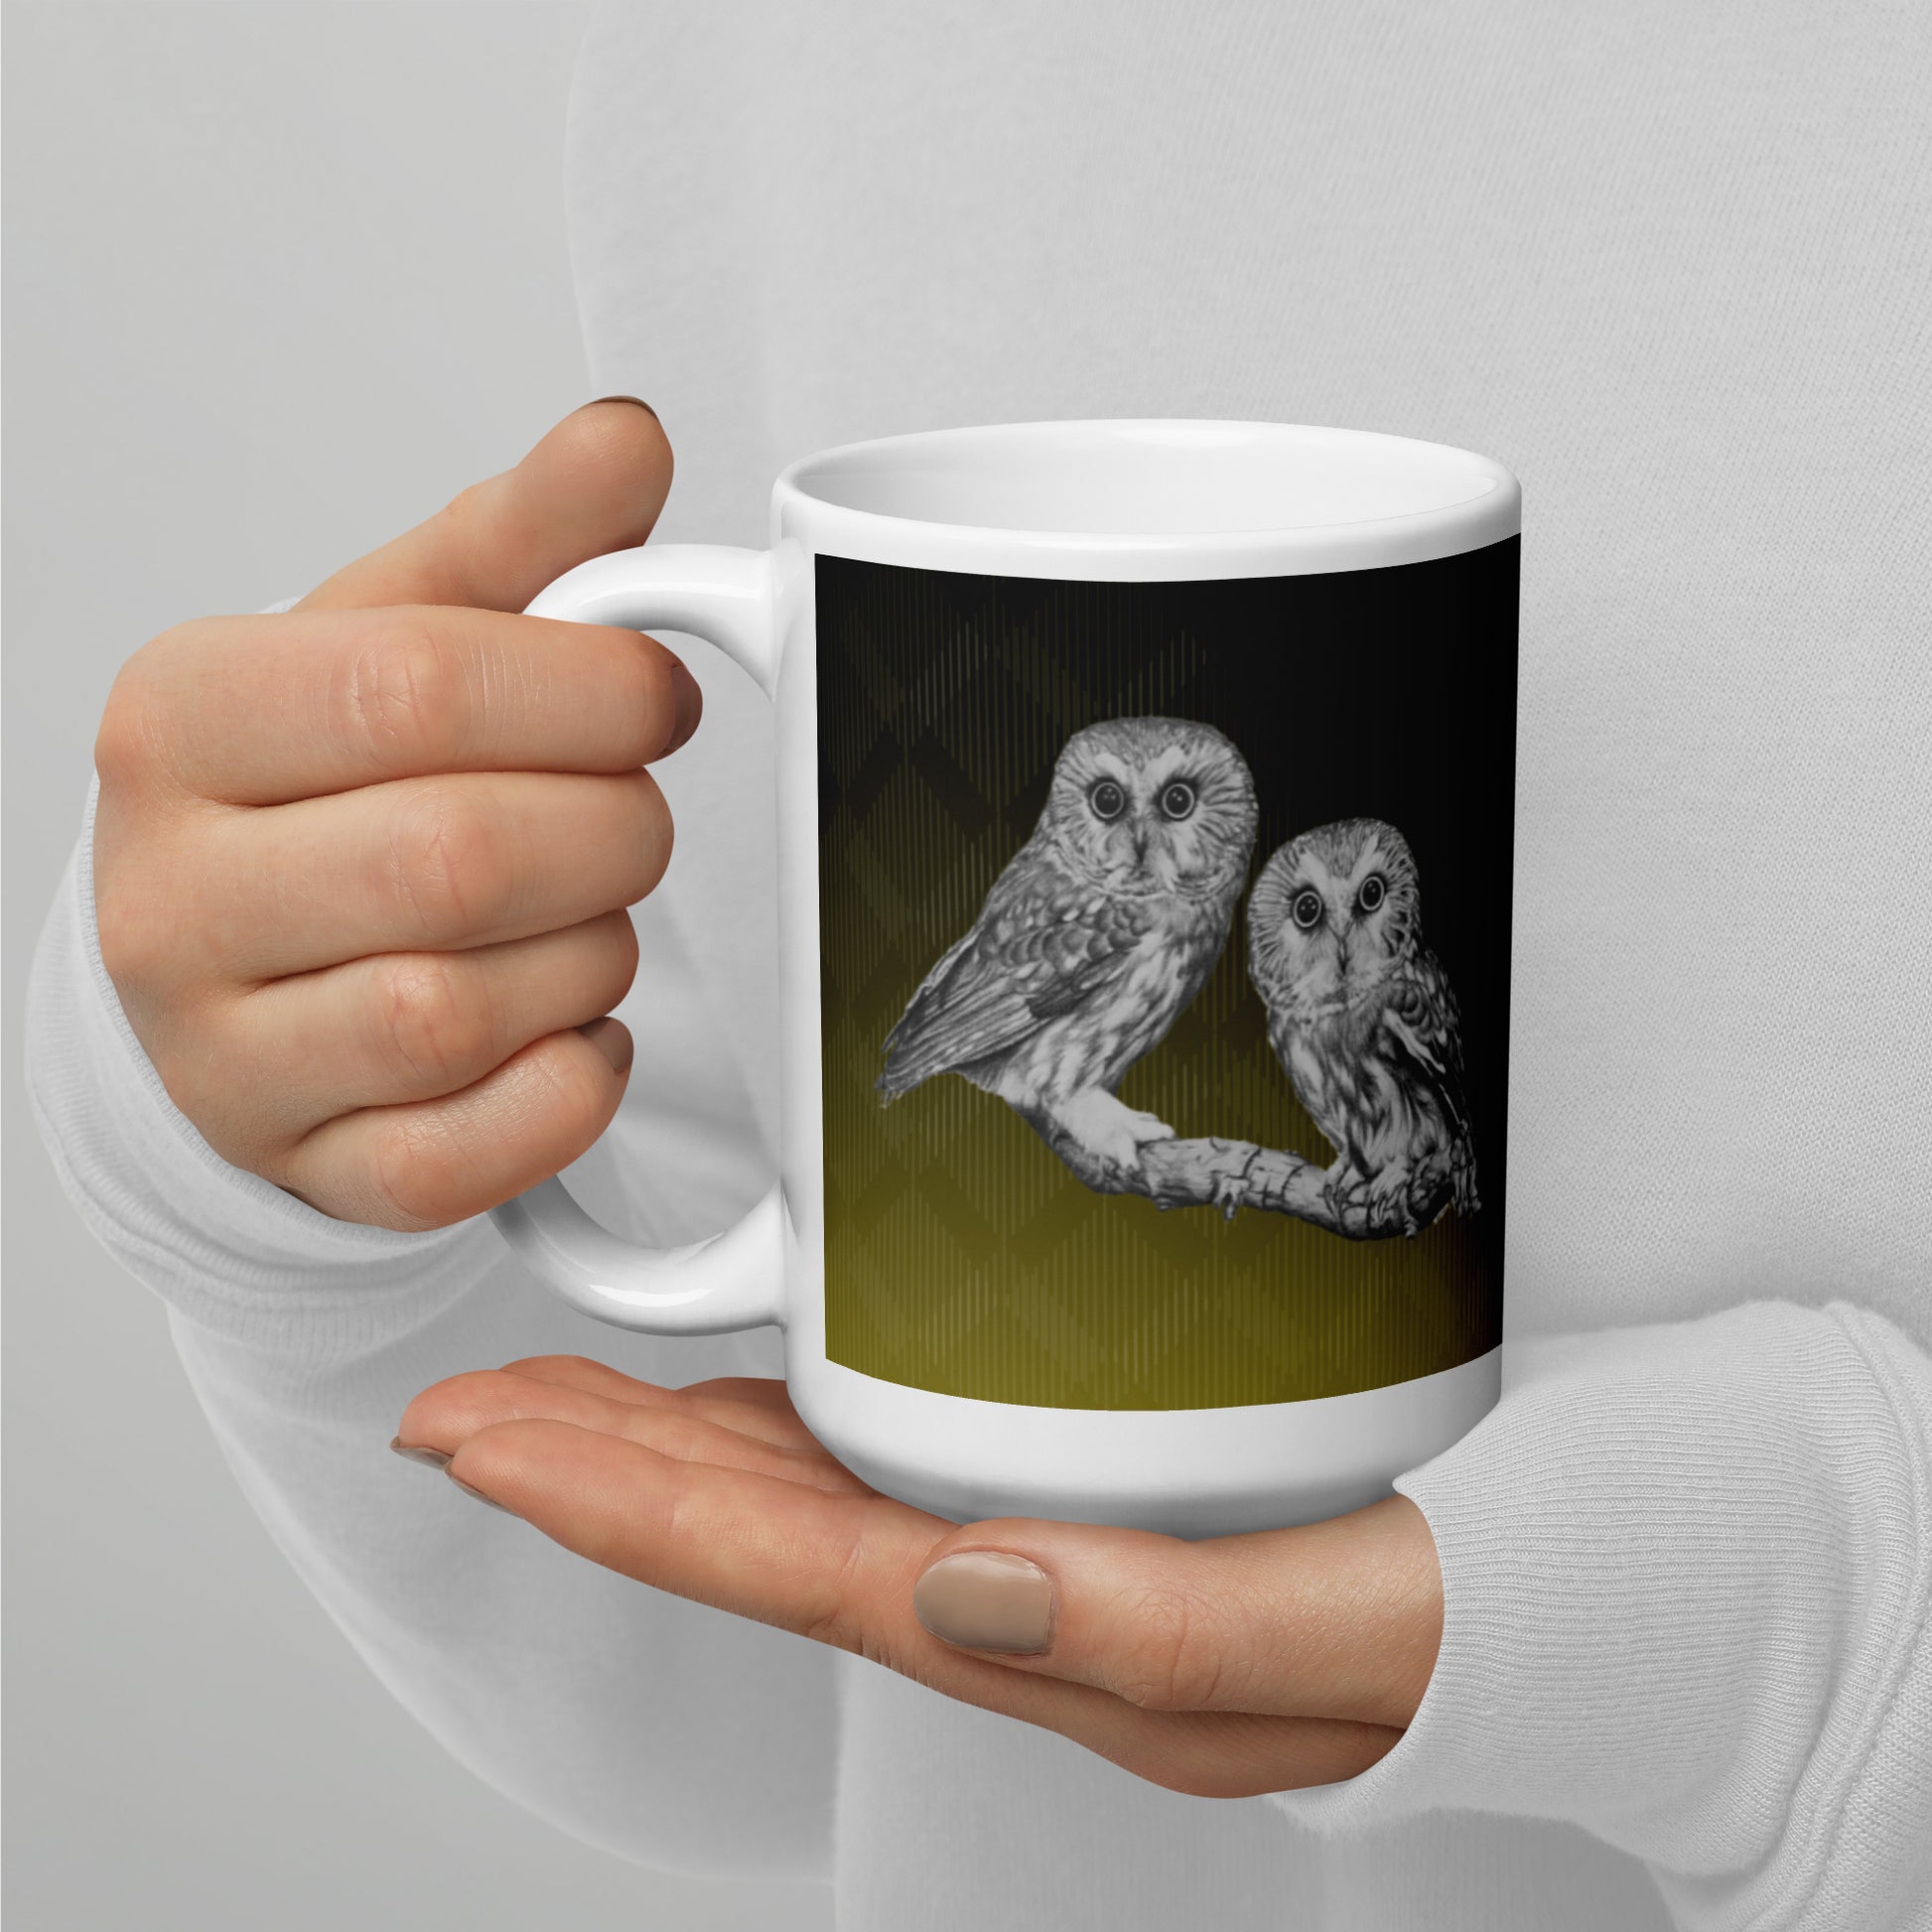 The "Owl White Glossy Mug" is of two owls sitting on a branch with a "Who's That" look, drawn with a graphite pencil on Hammermill Bond paper.